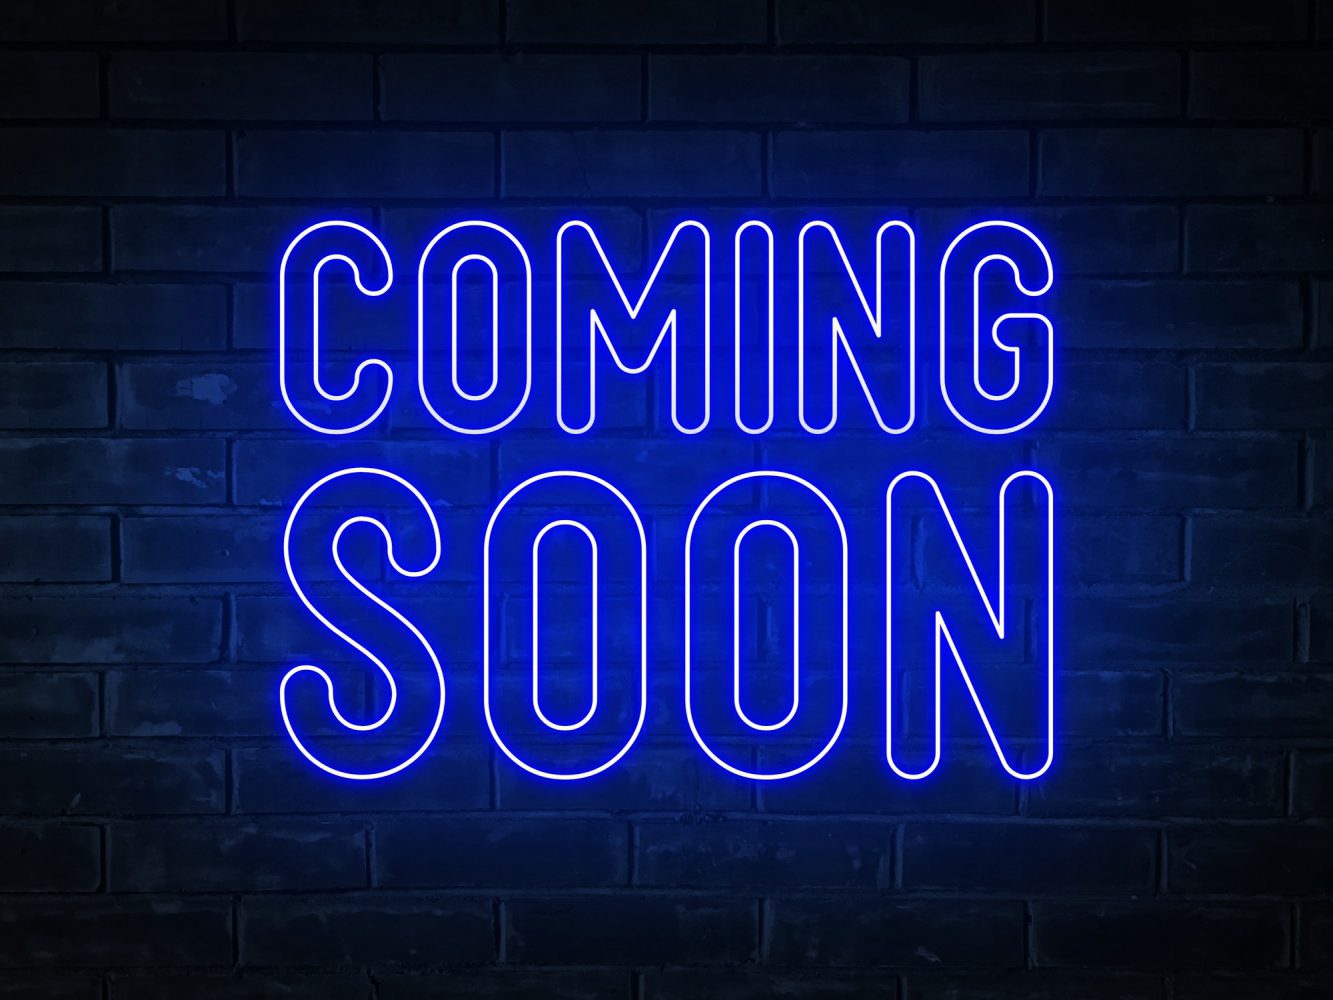 Coming soon - blue neon light word on brick wall background